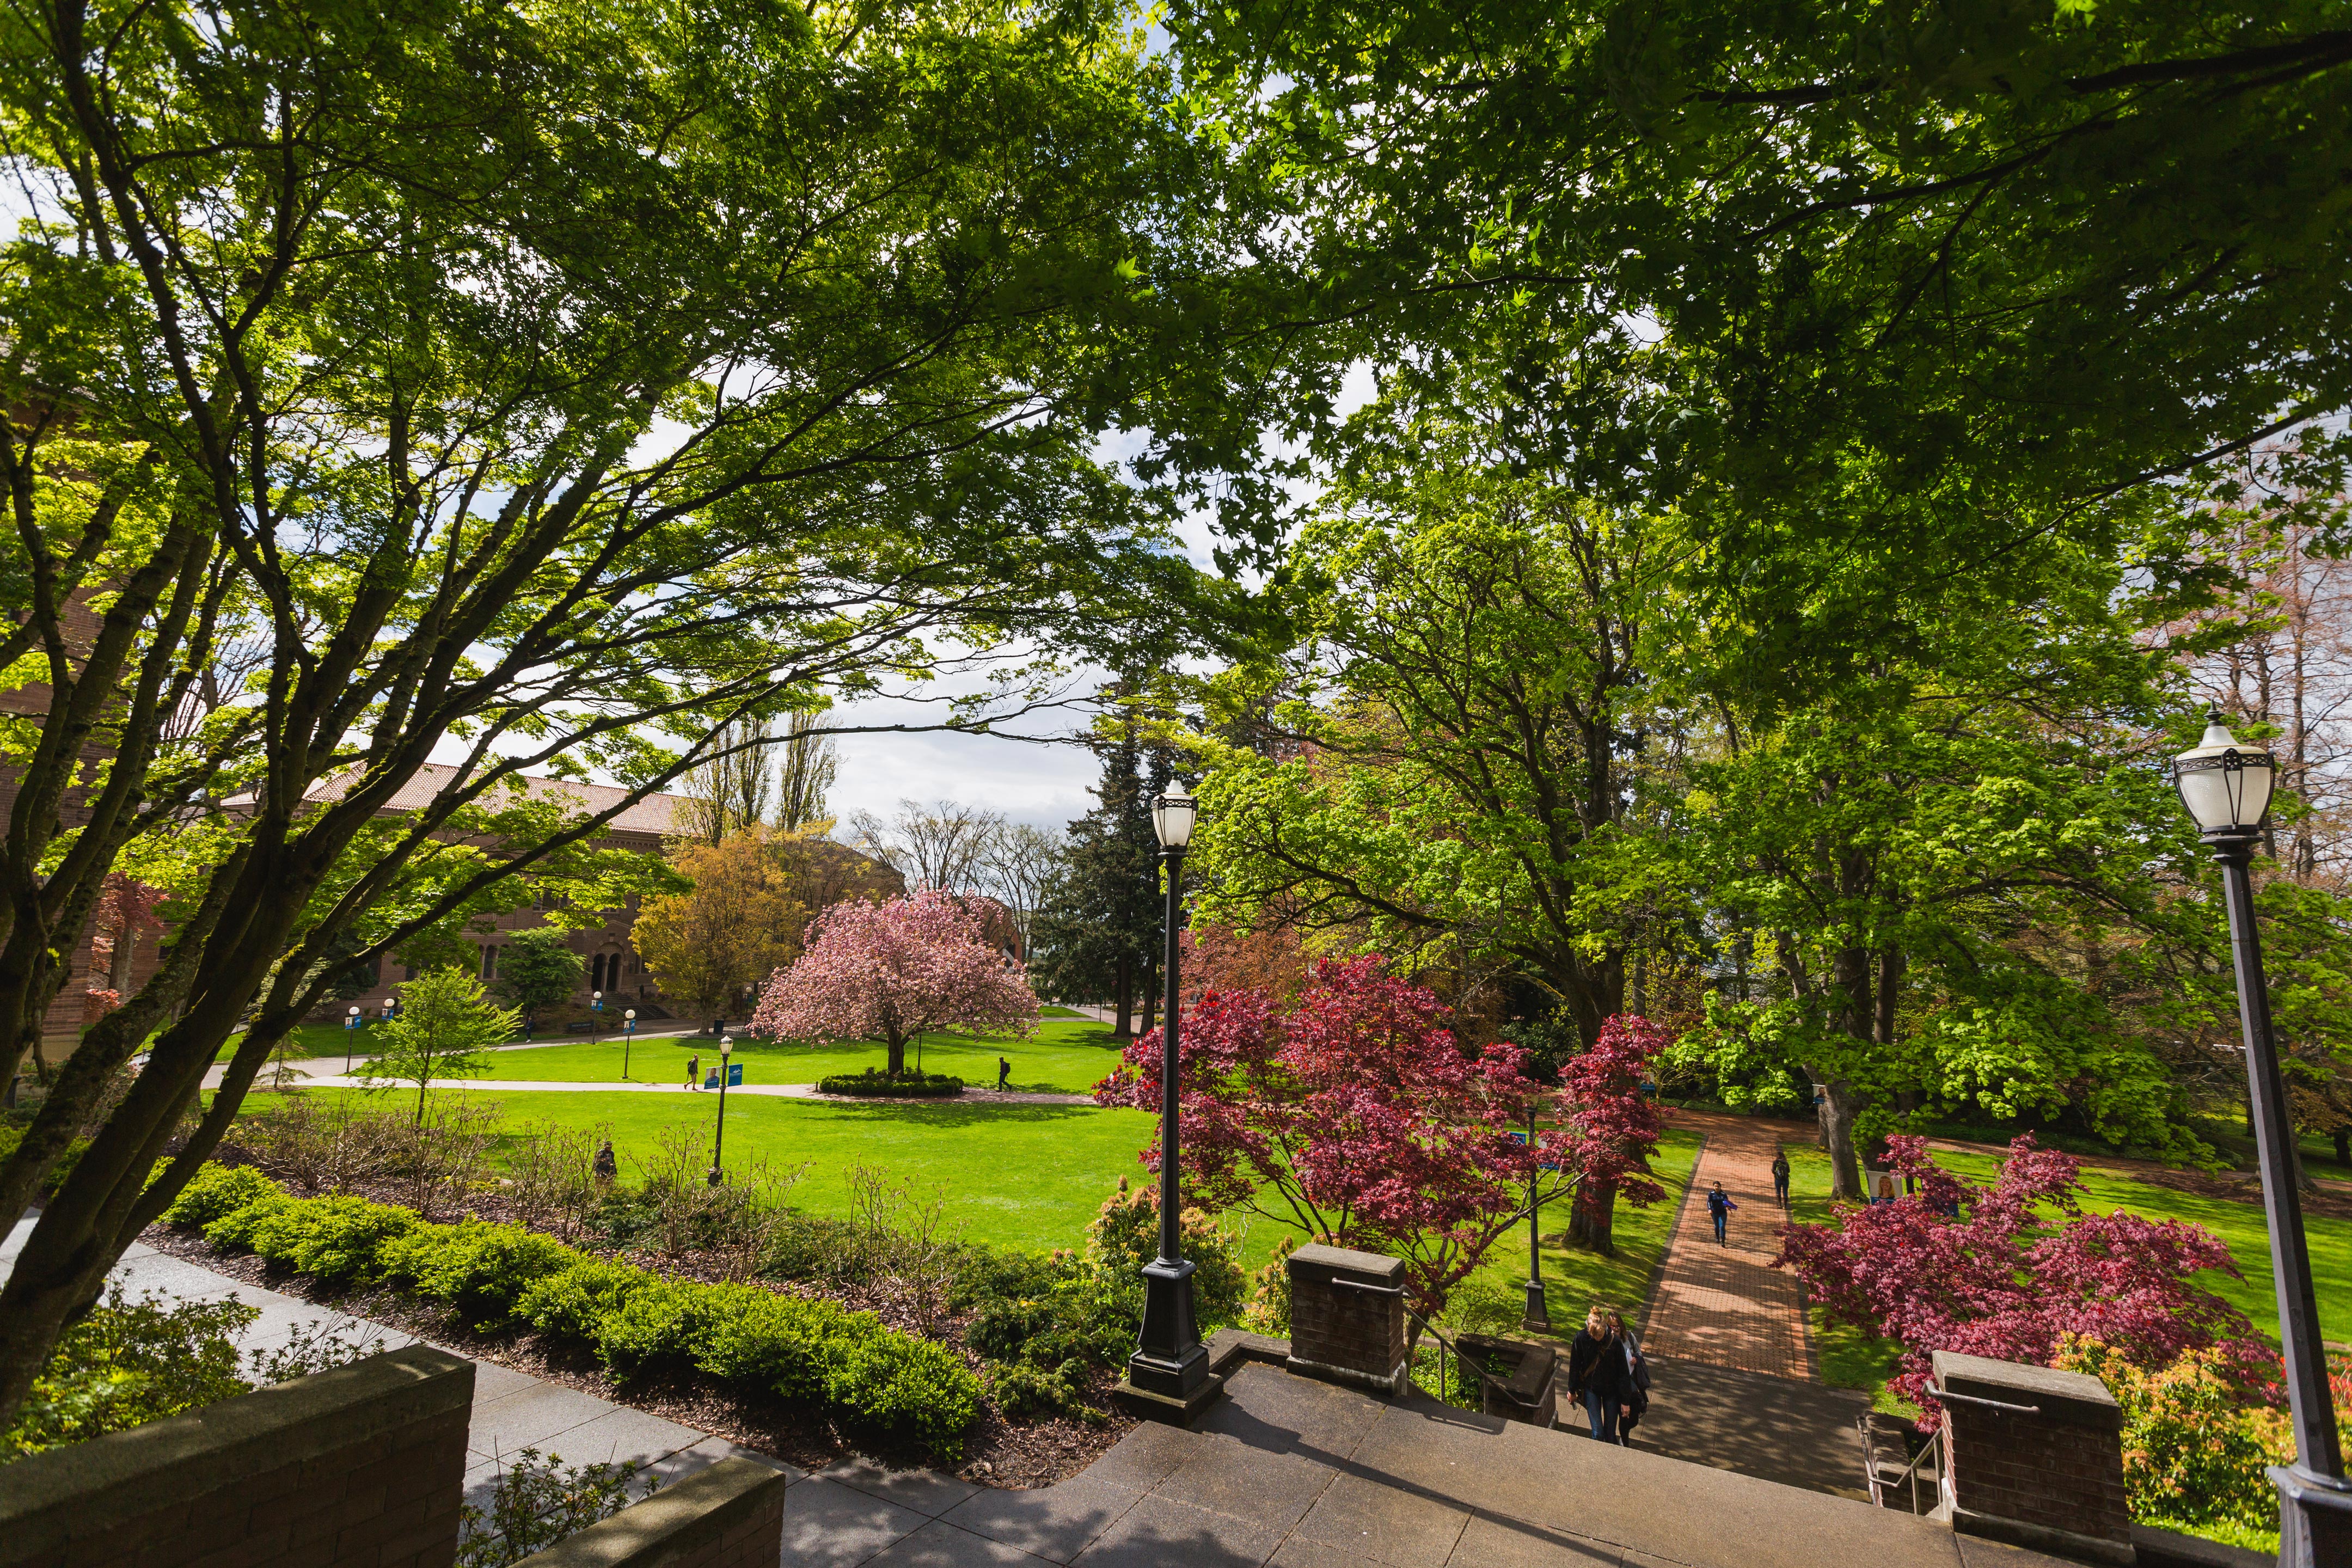 A late spring view of Old Main lawn, with leafed-out trees and the pink blossoms of the cheery tree in full bloom. 